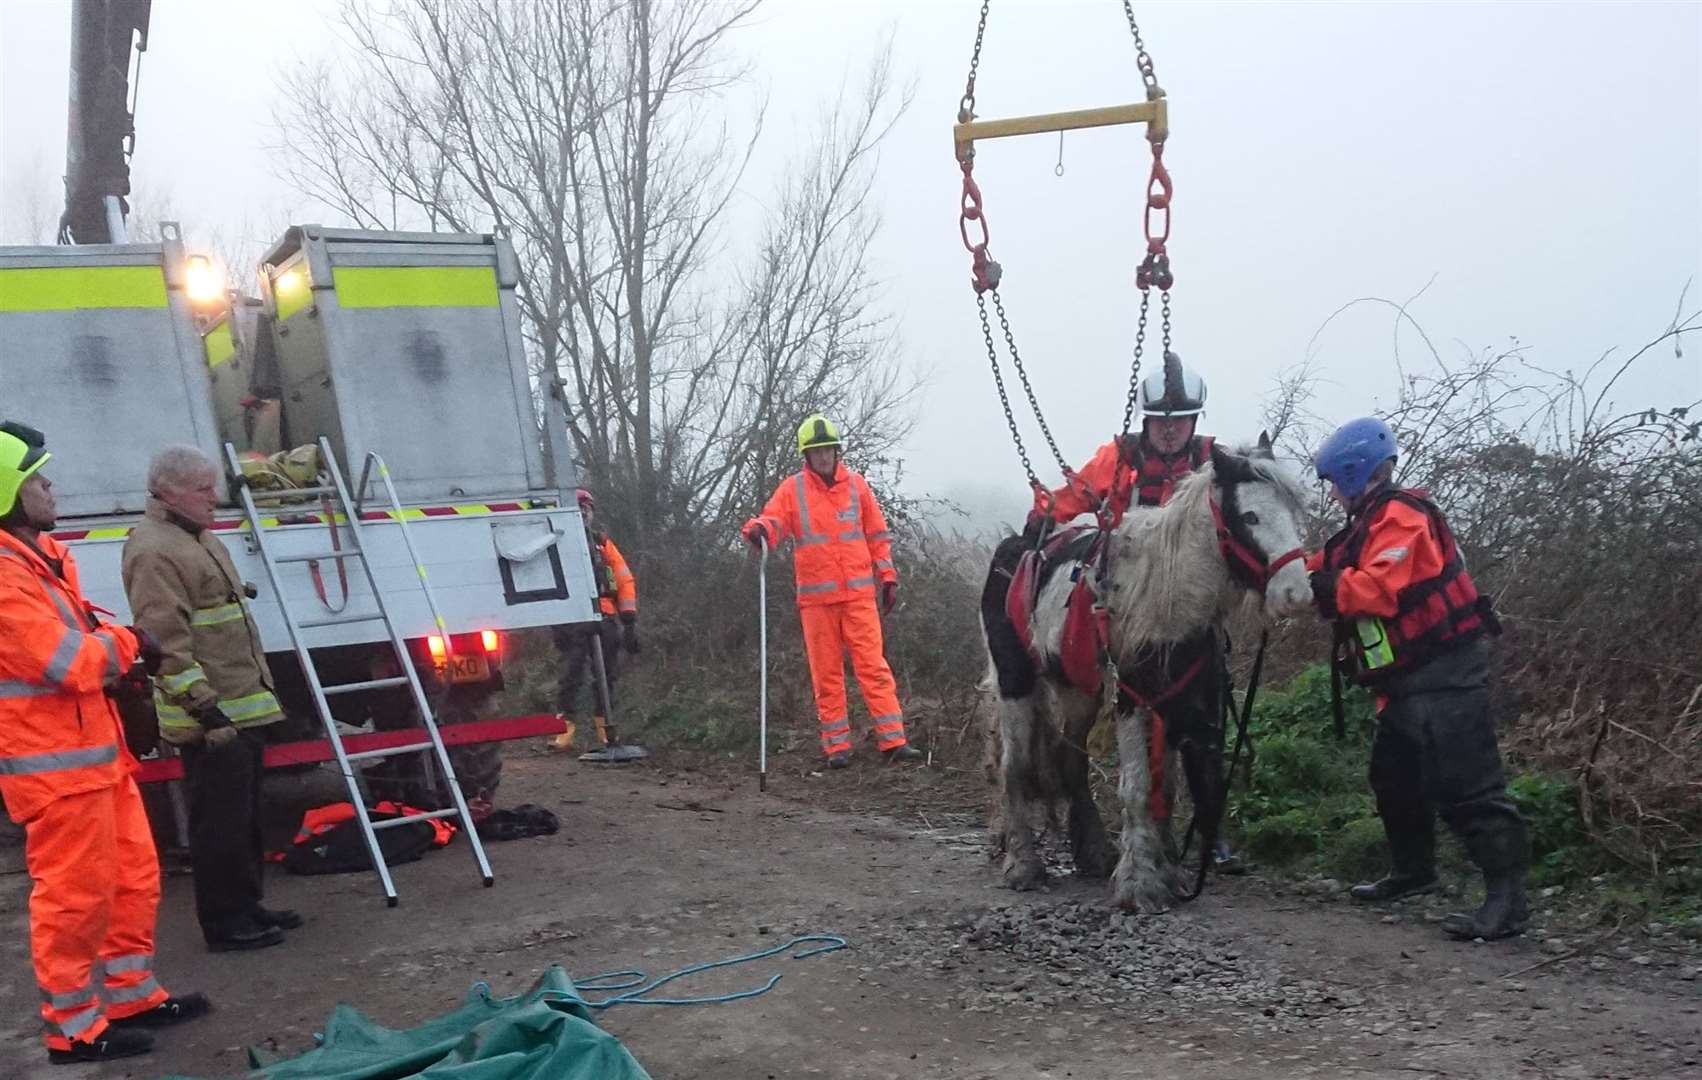 The special machinery being used to hoist another horse to safety in Medway back in February